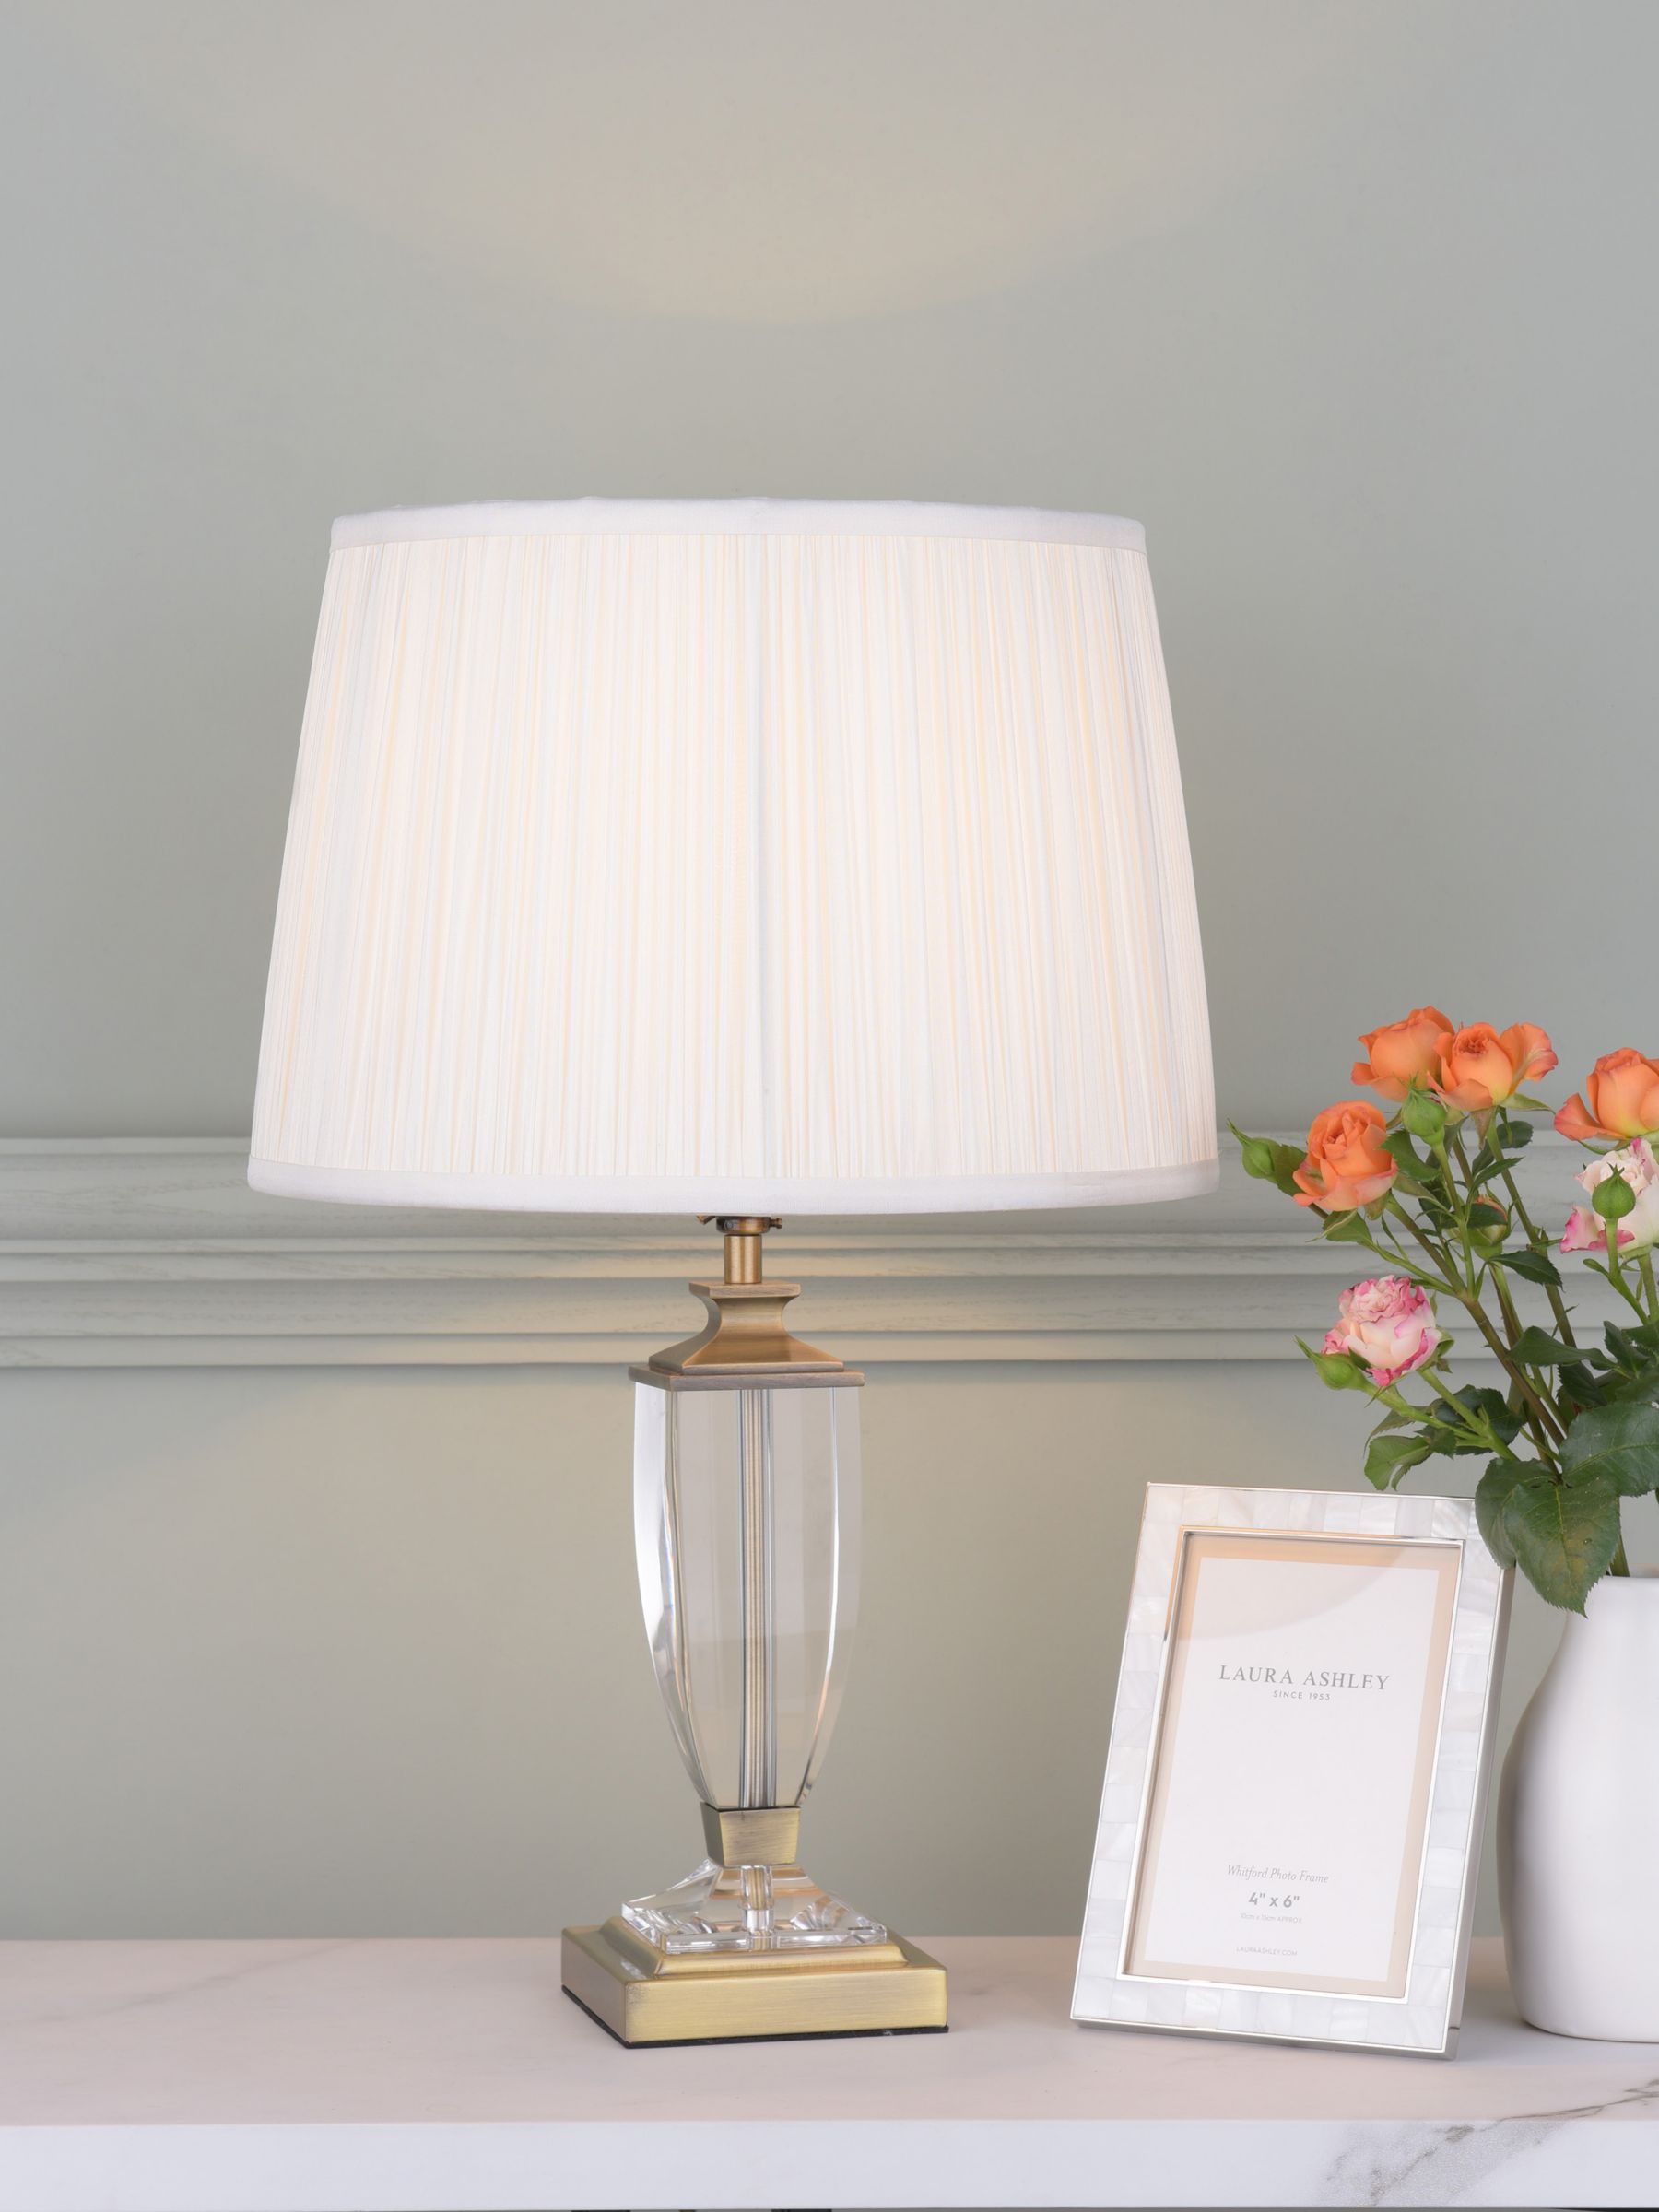 Laura Ashley Carson Crystal Table Lamp Small Antique Brass – The